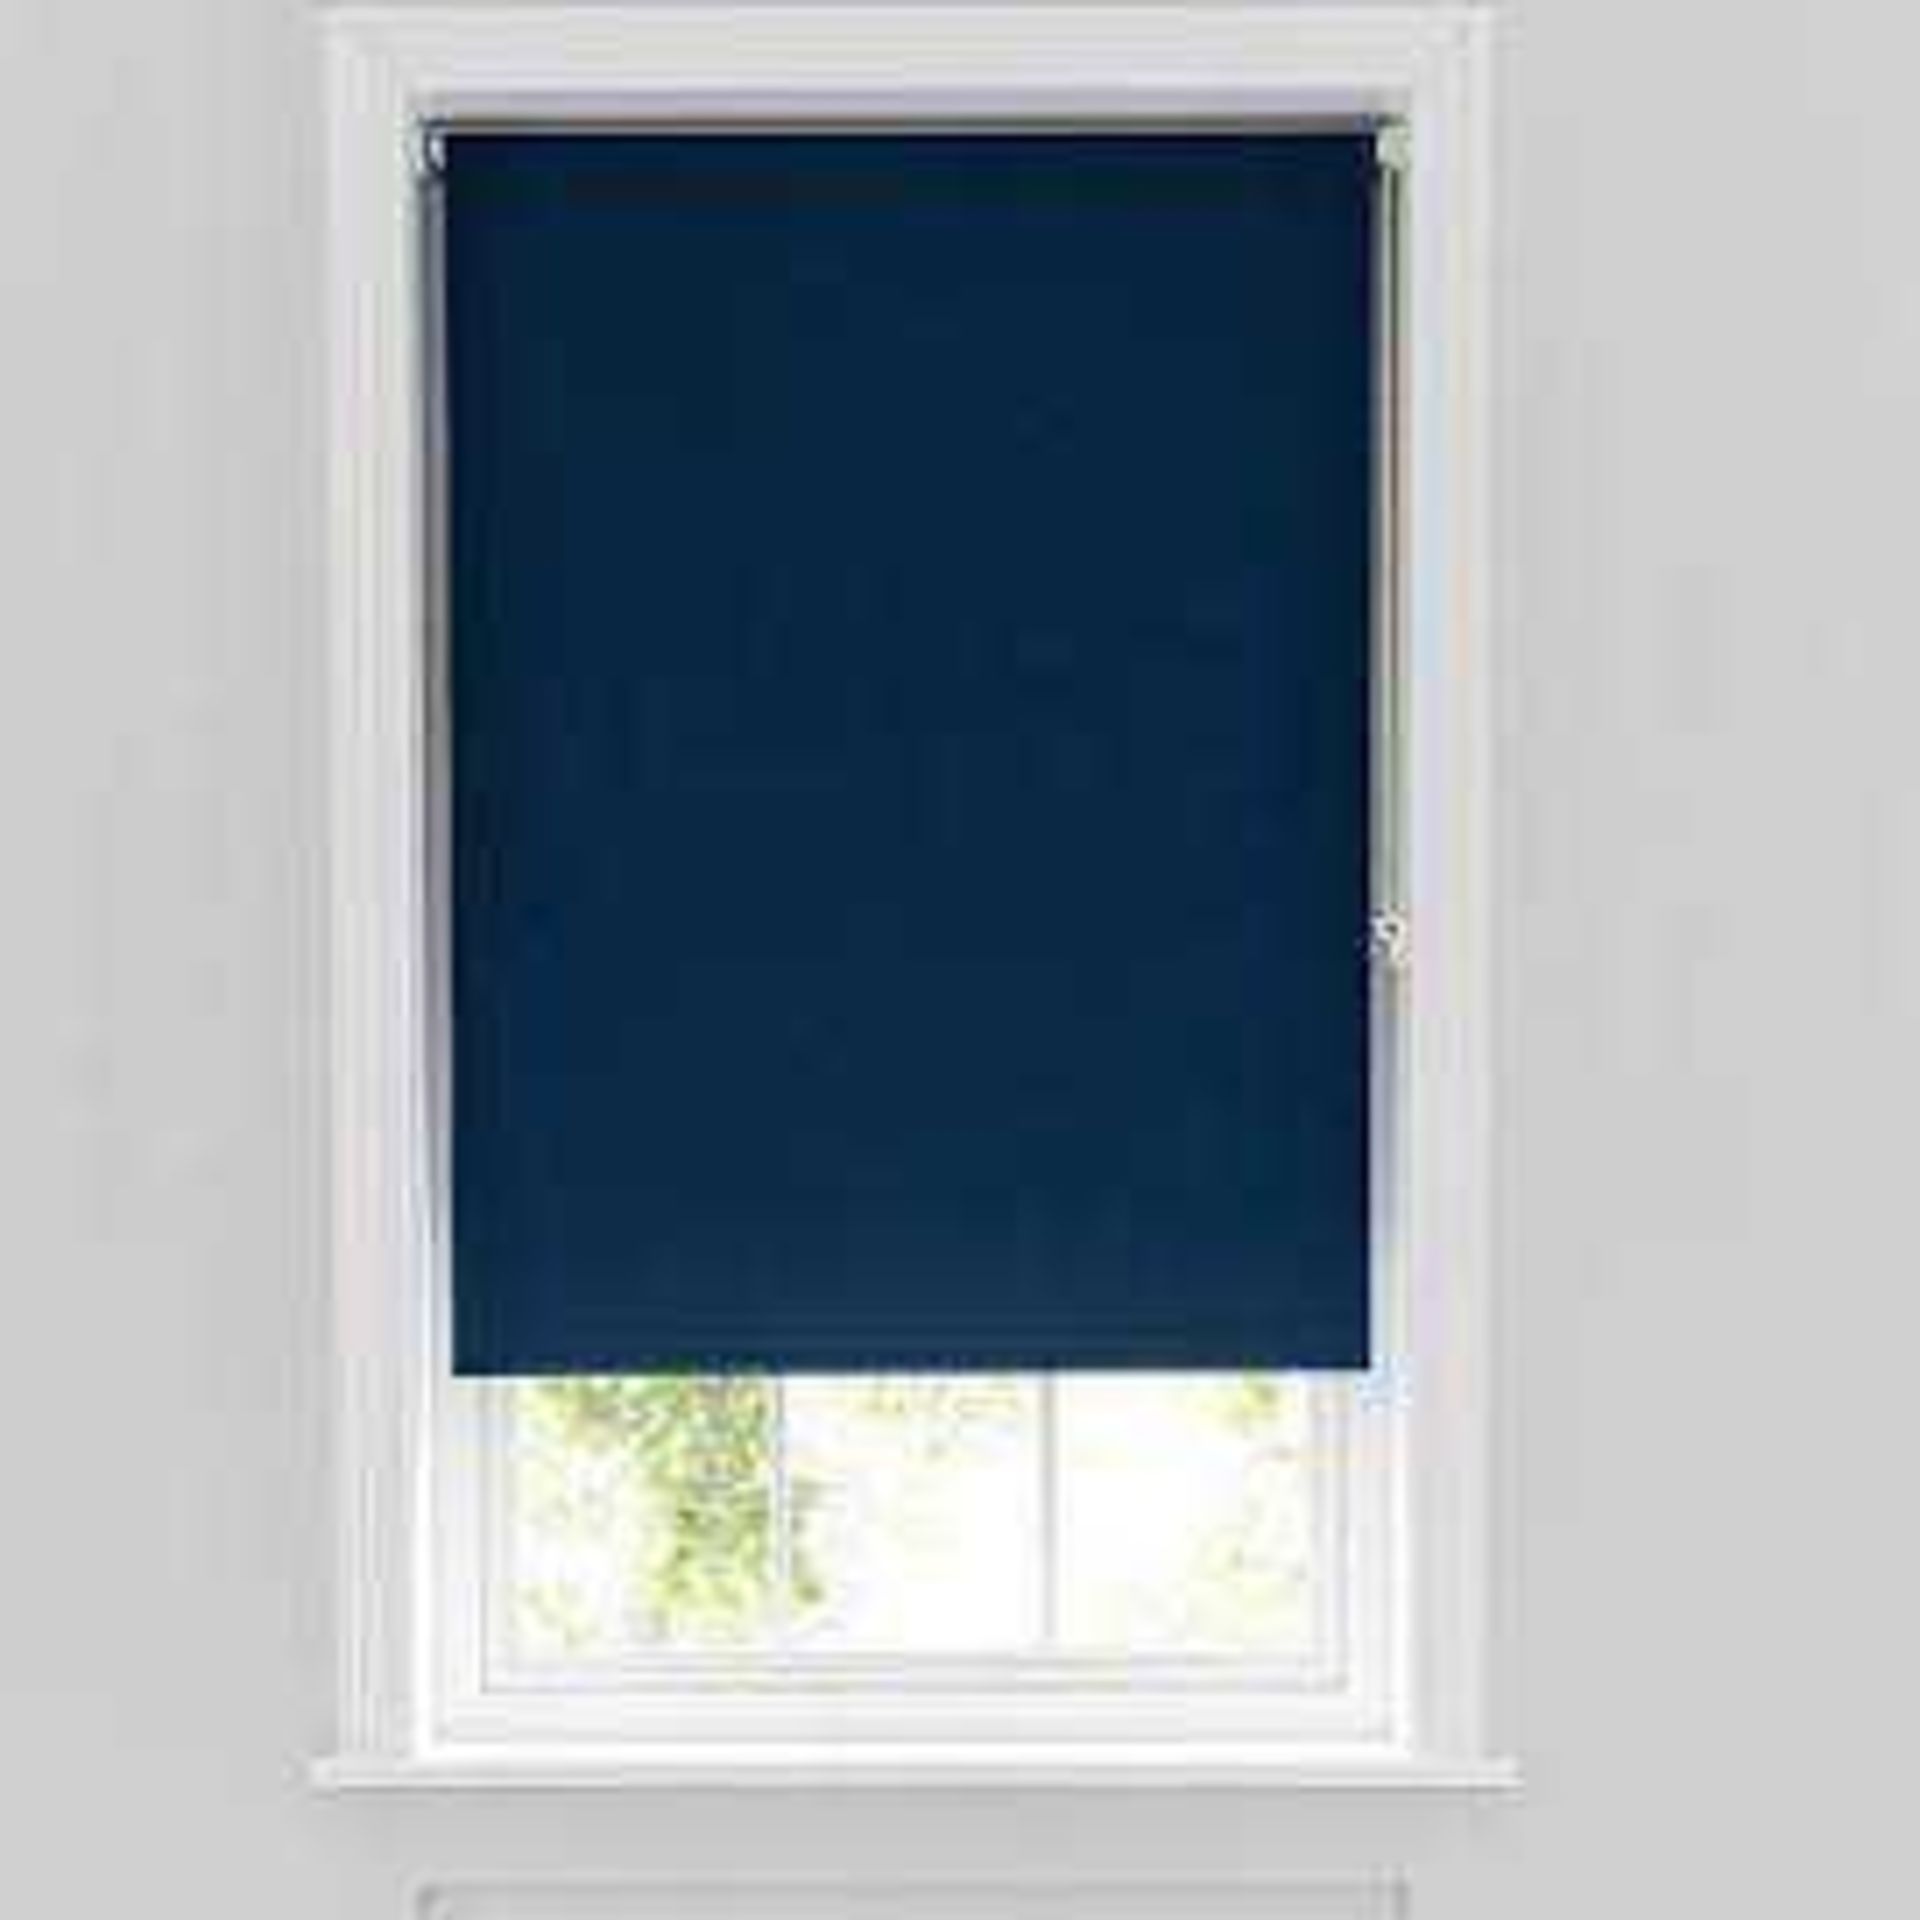 Combined RRP £2590 Pallet To Contain 288 Gardenia Black Out Blind Blue 142X180Cm All Grade A Slow